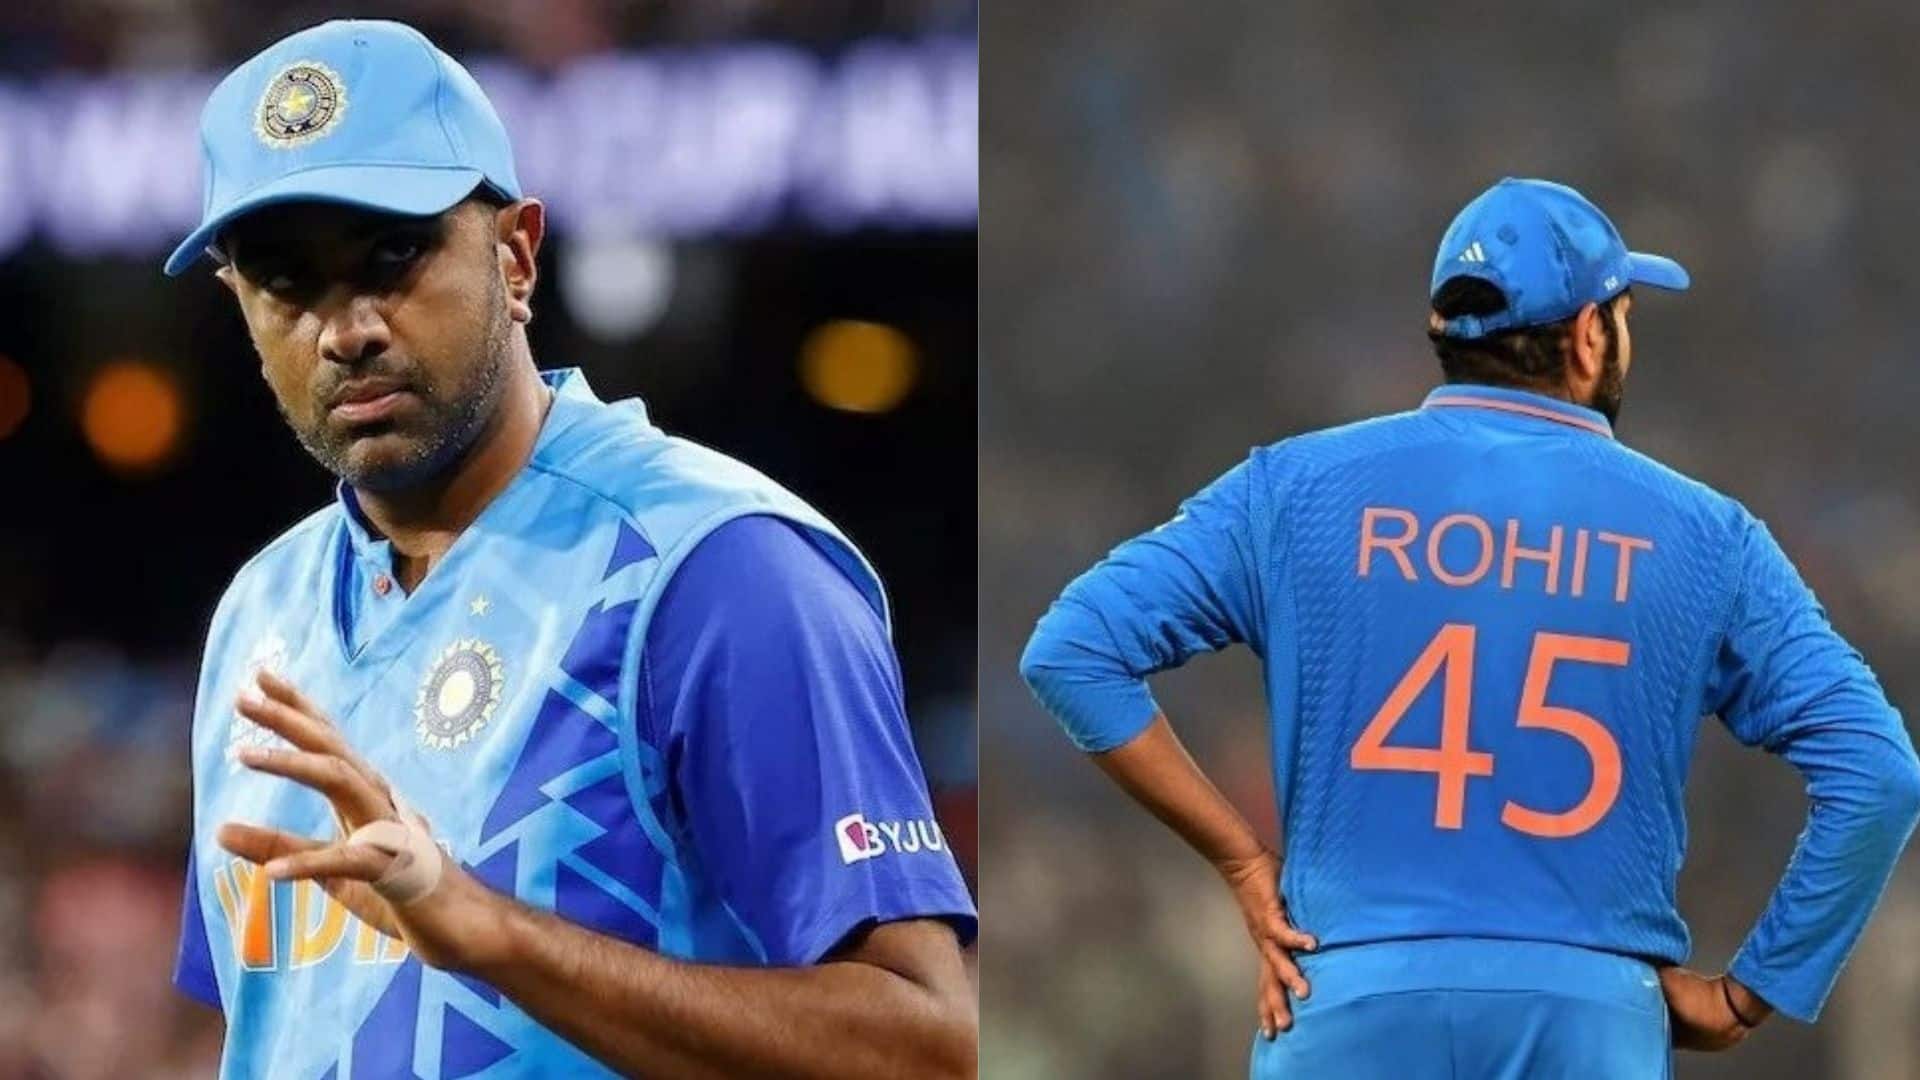 'Outstanding Person With Advanced Leadership': Ashwin Hails Rohit Sharma